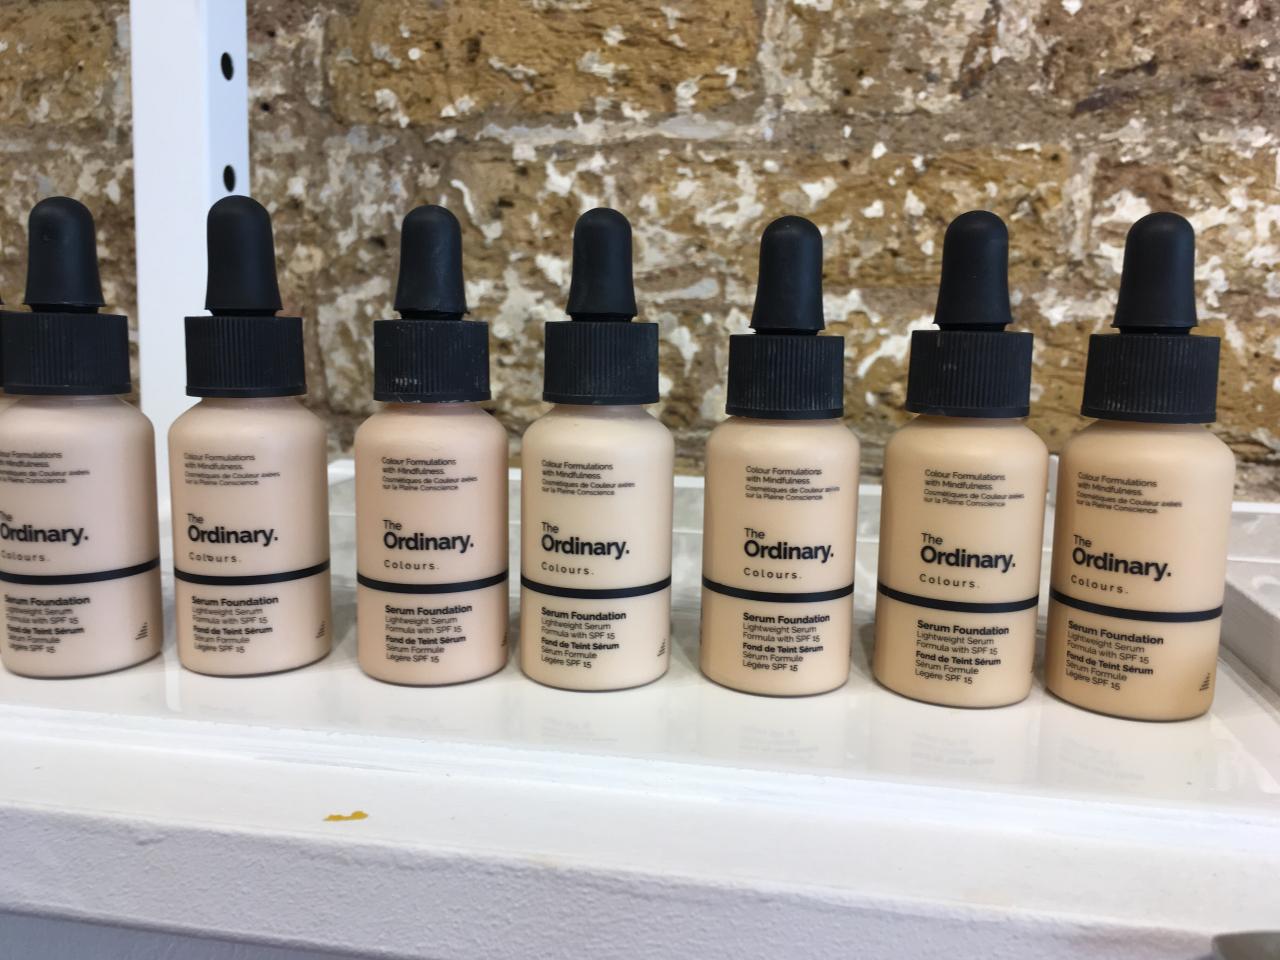 New The Ordinary Colours Foundation Sneak Peek And Colour Chart ⋆ Niapattenlooks